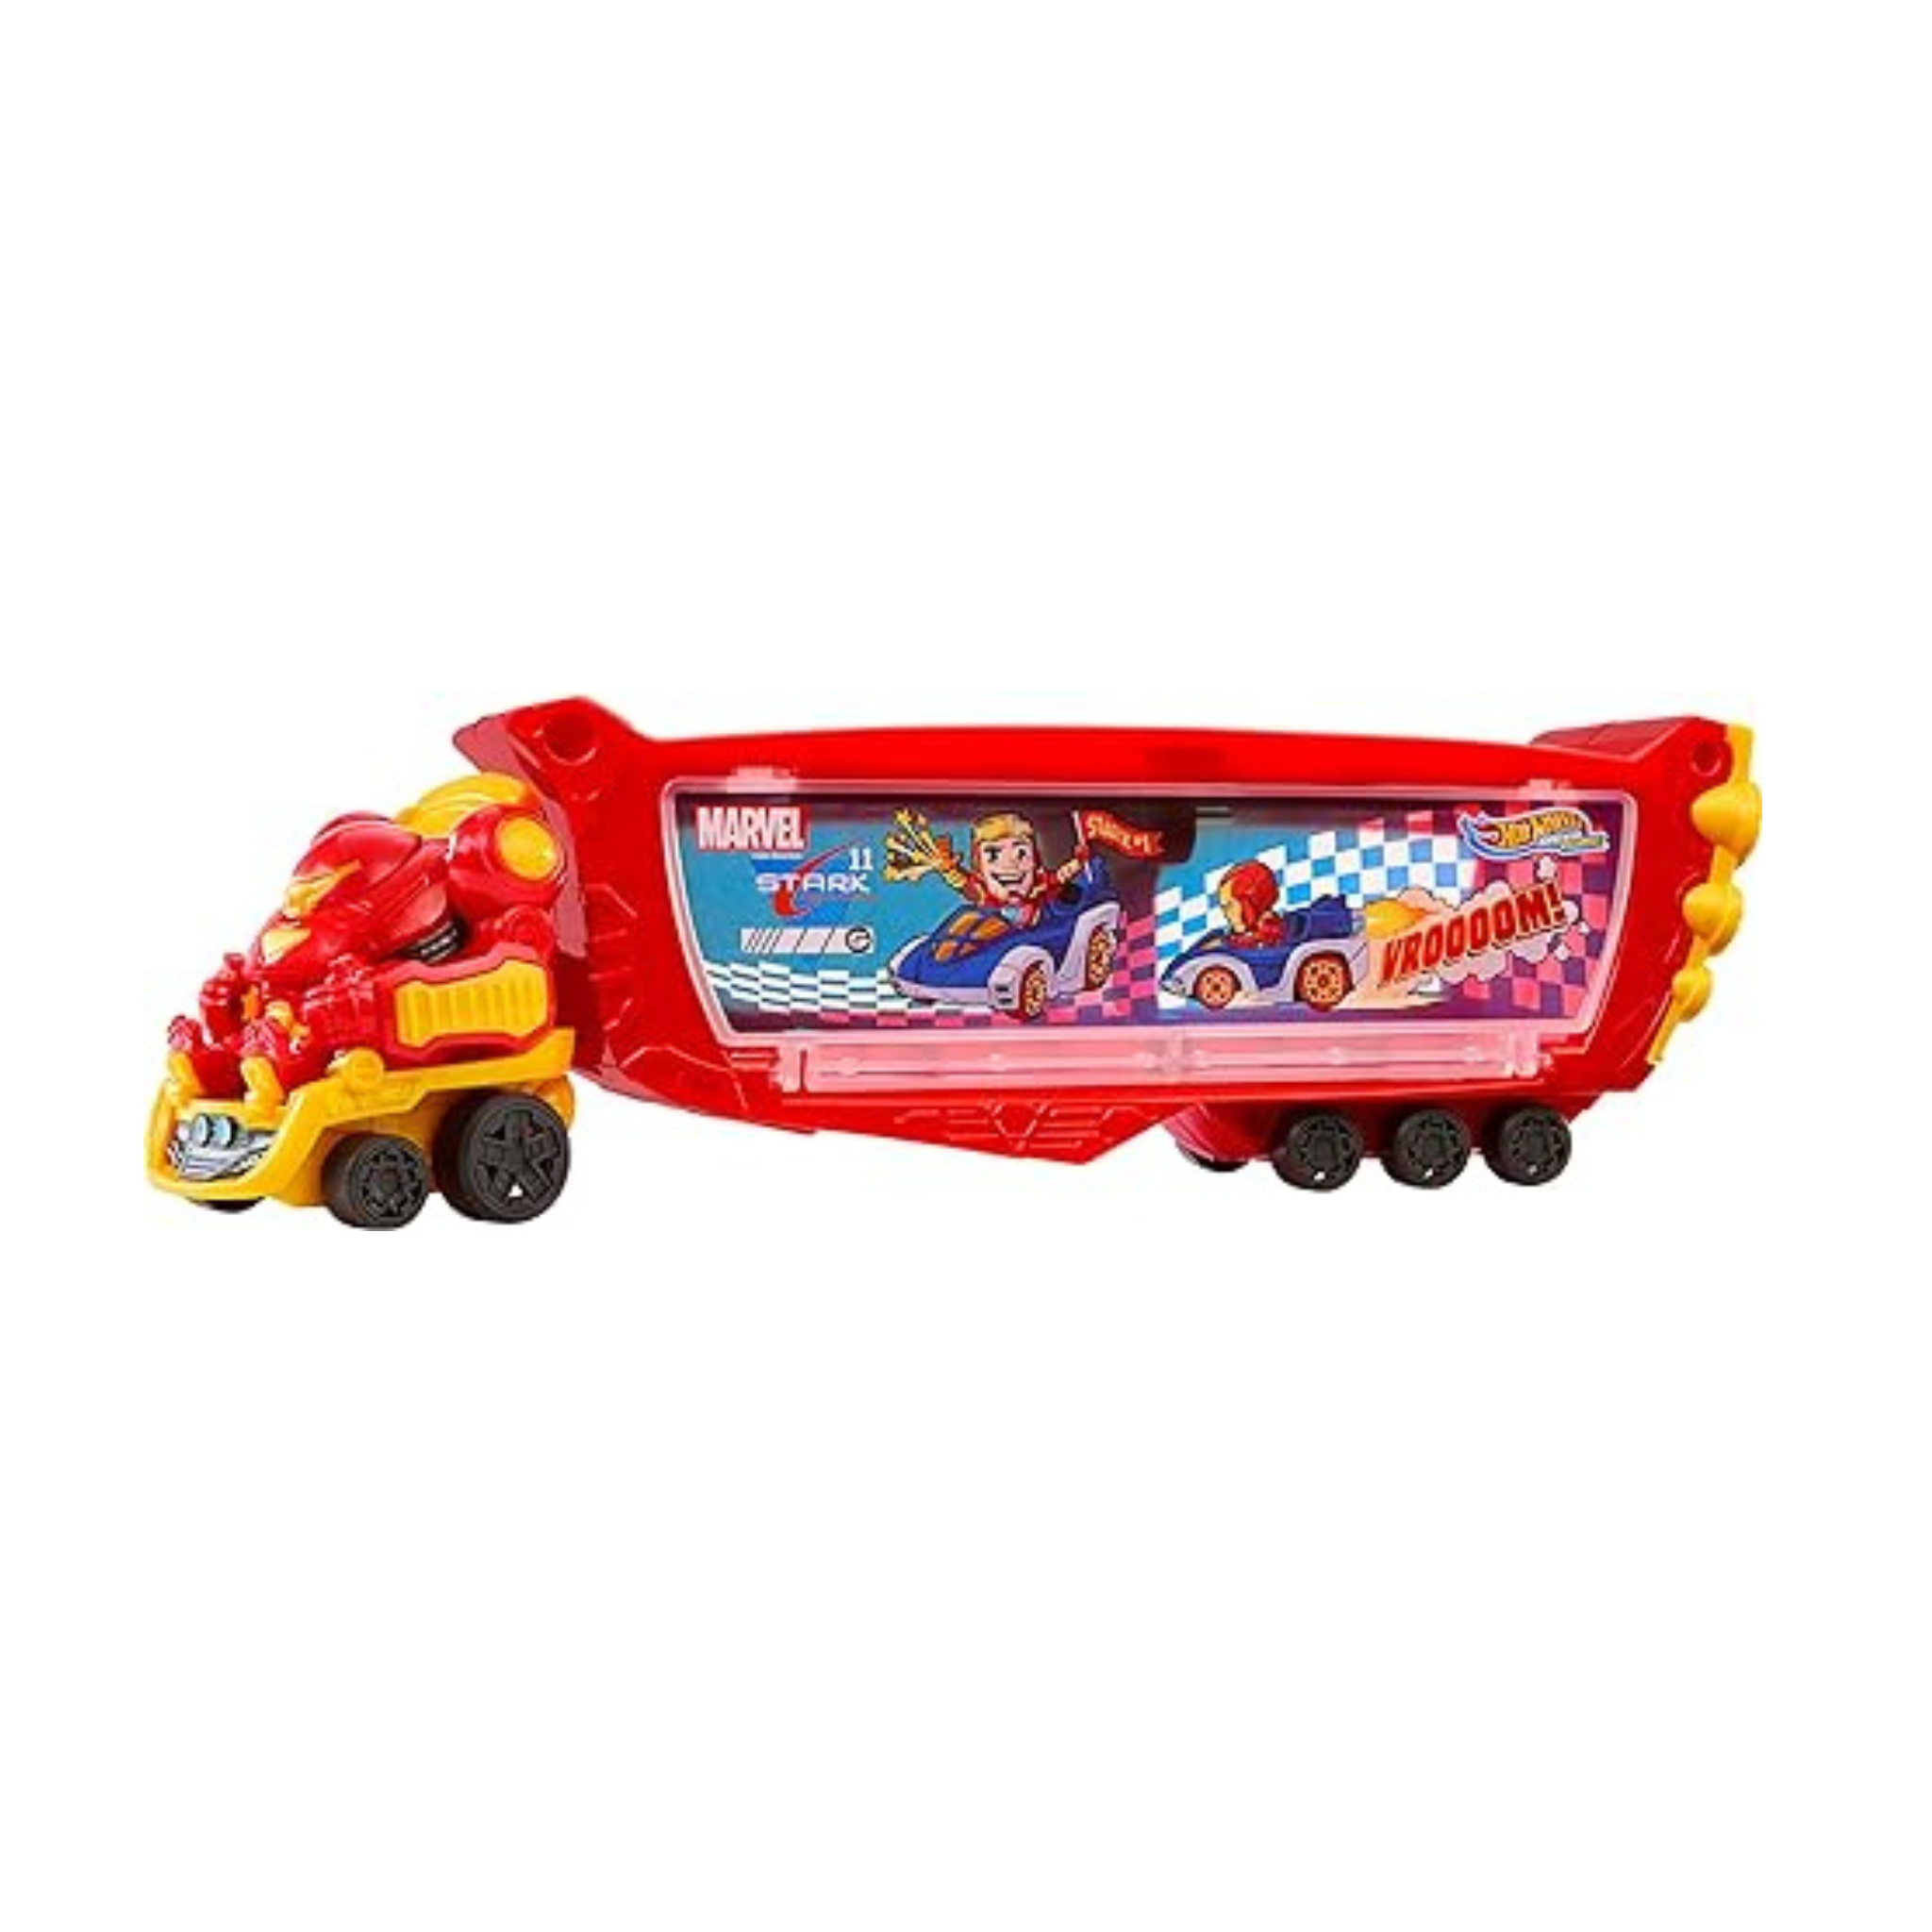 Save on Various Hot Wheels Toys at Amazon!